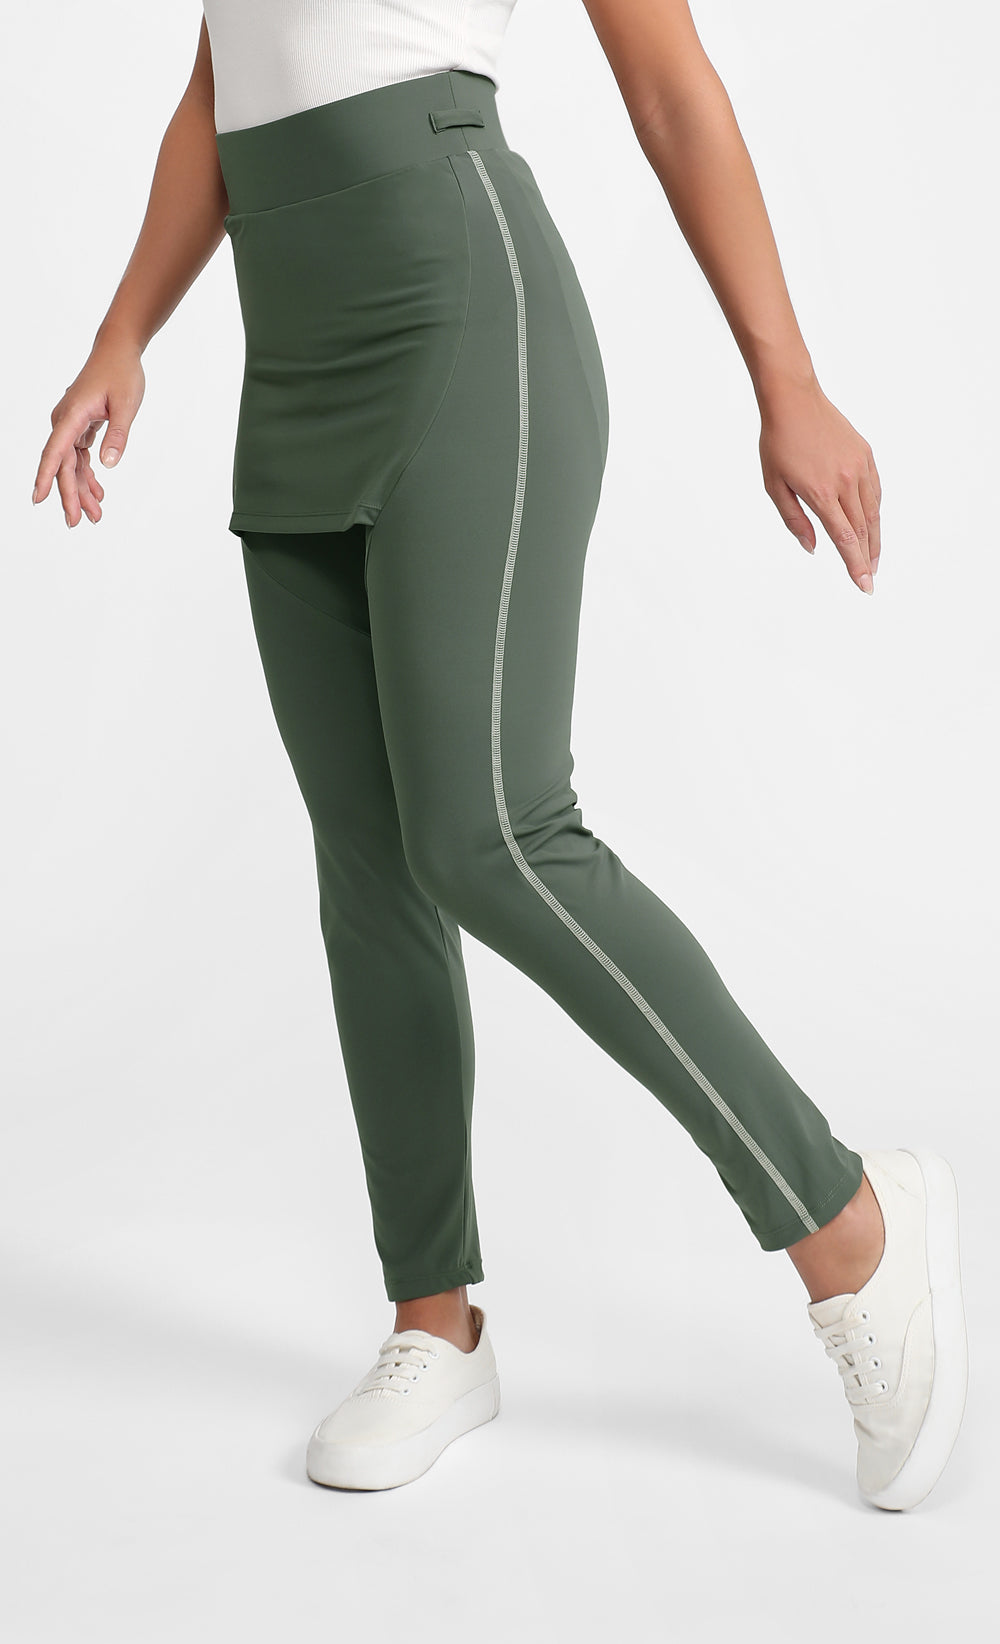 Attached Skirt Swim Leggings in Dusty Sage – LILIT. Store